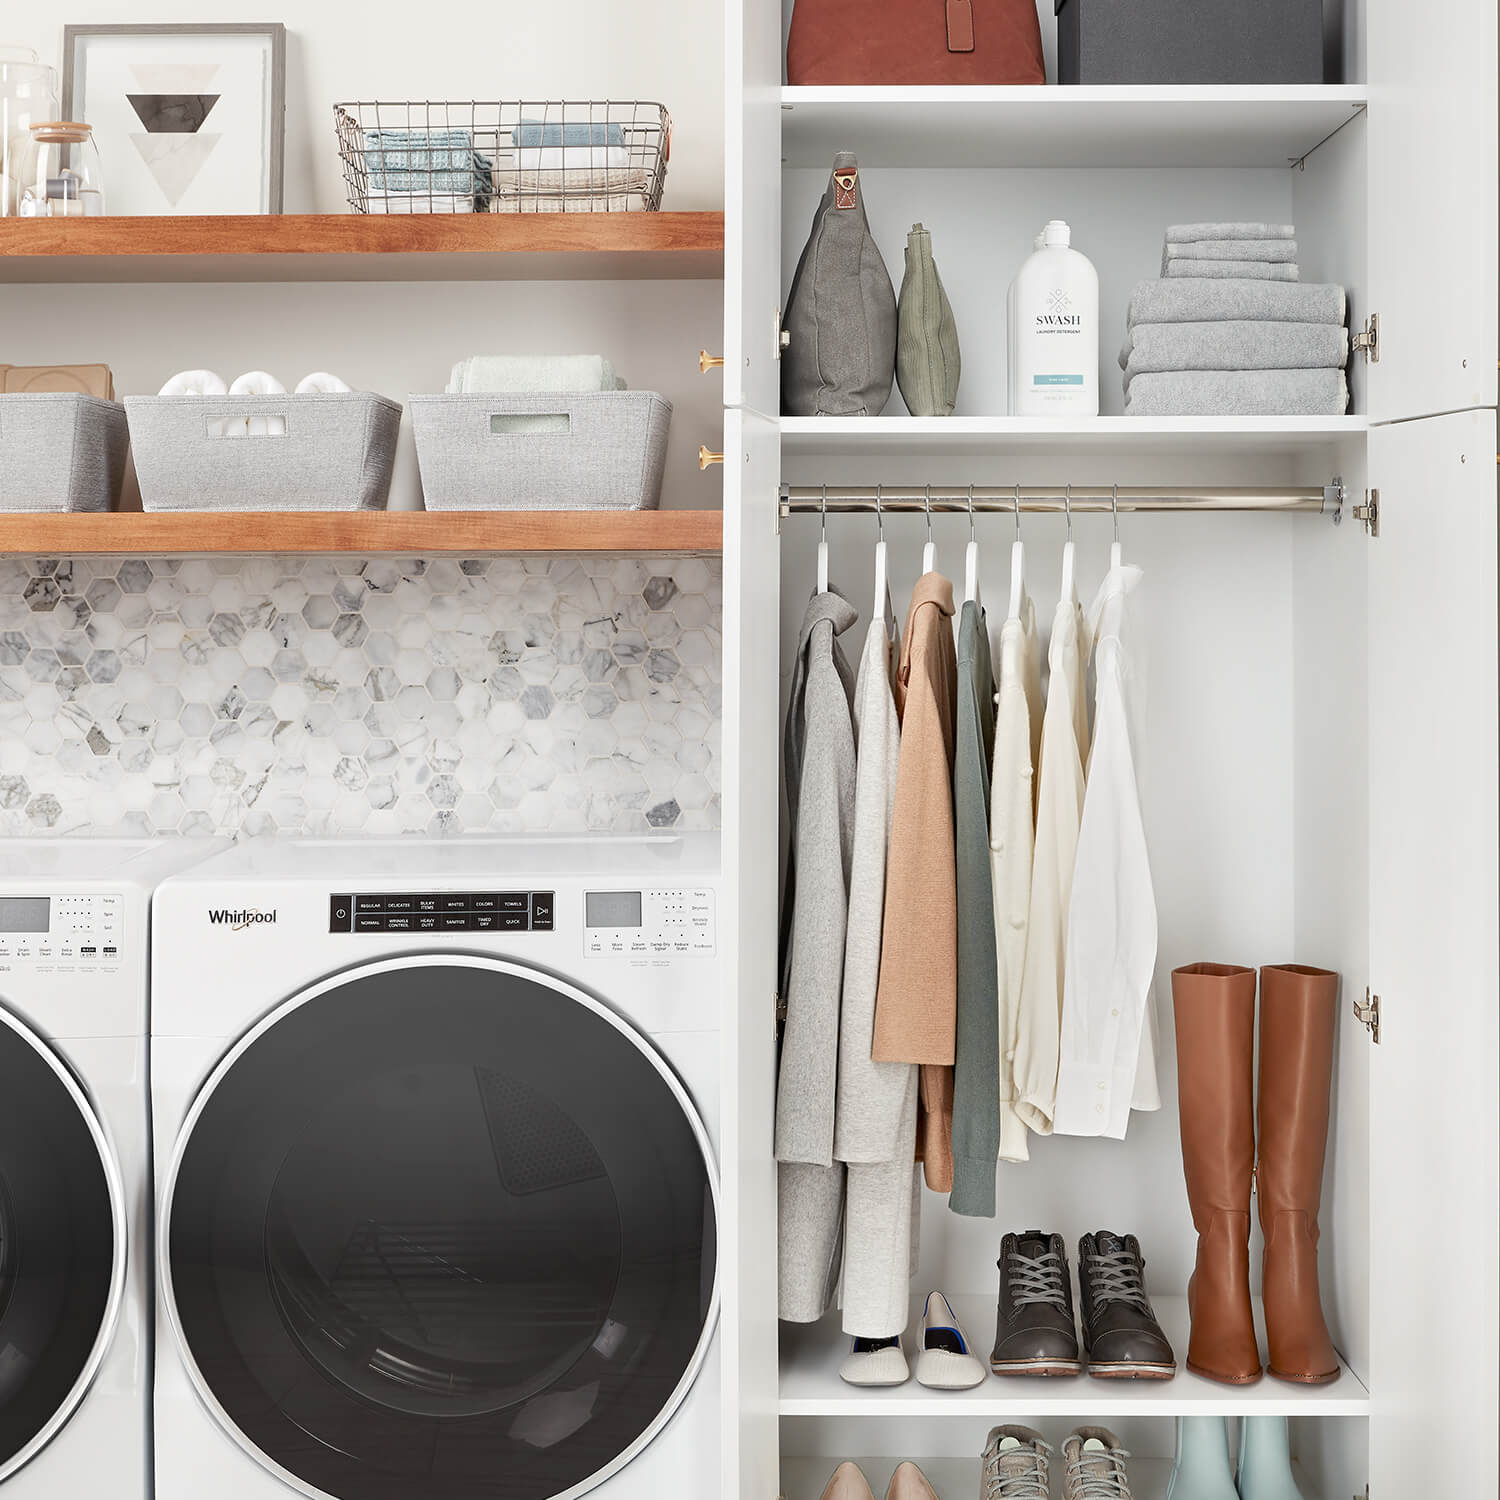 A look at inside of a cabinet in a laundry room with hanging space that is neatly organized next to a white Whirlpool washer and dryer